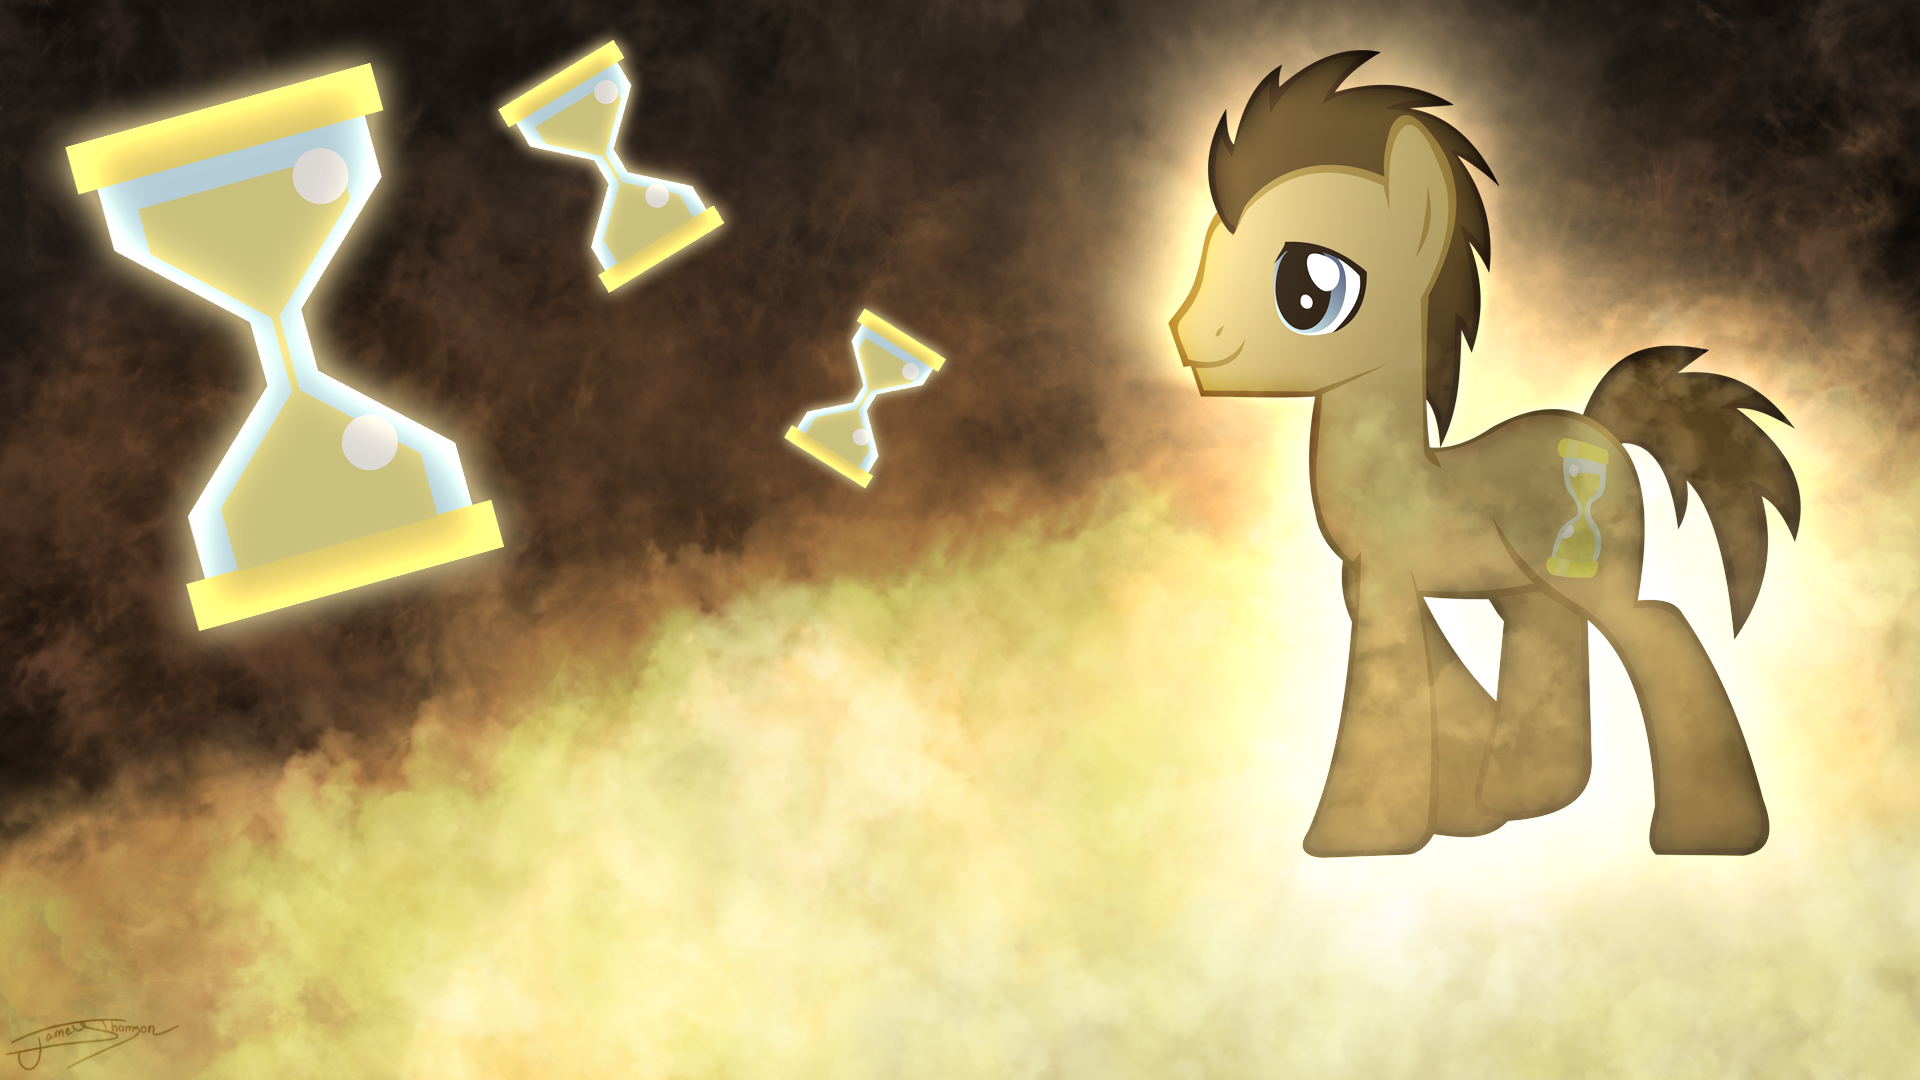 Dr. Whooves - Wibbly Wobbly Timey Wimey by Jamey4, Kna and ooklah